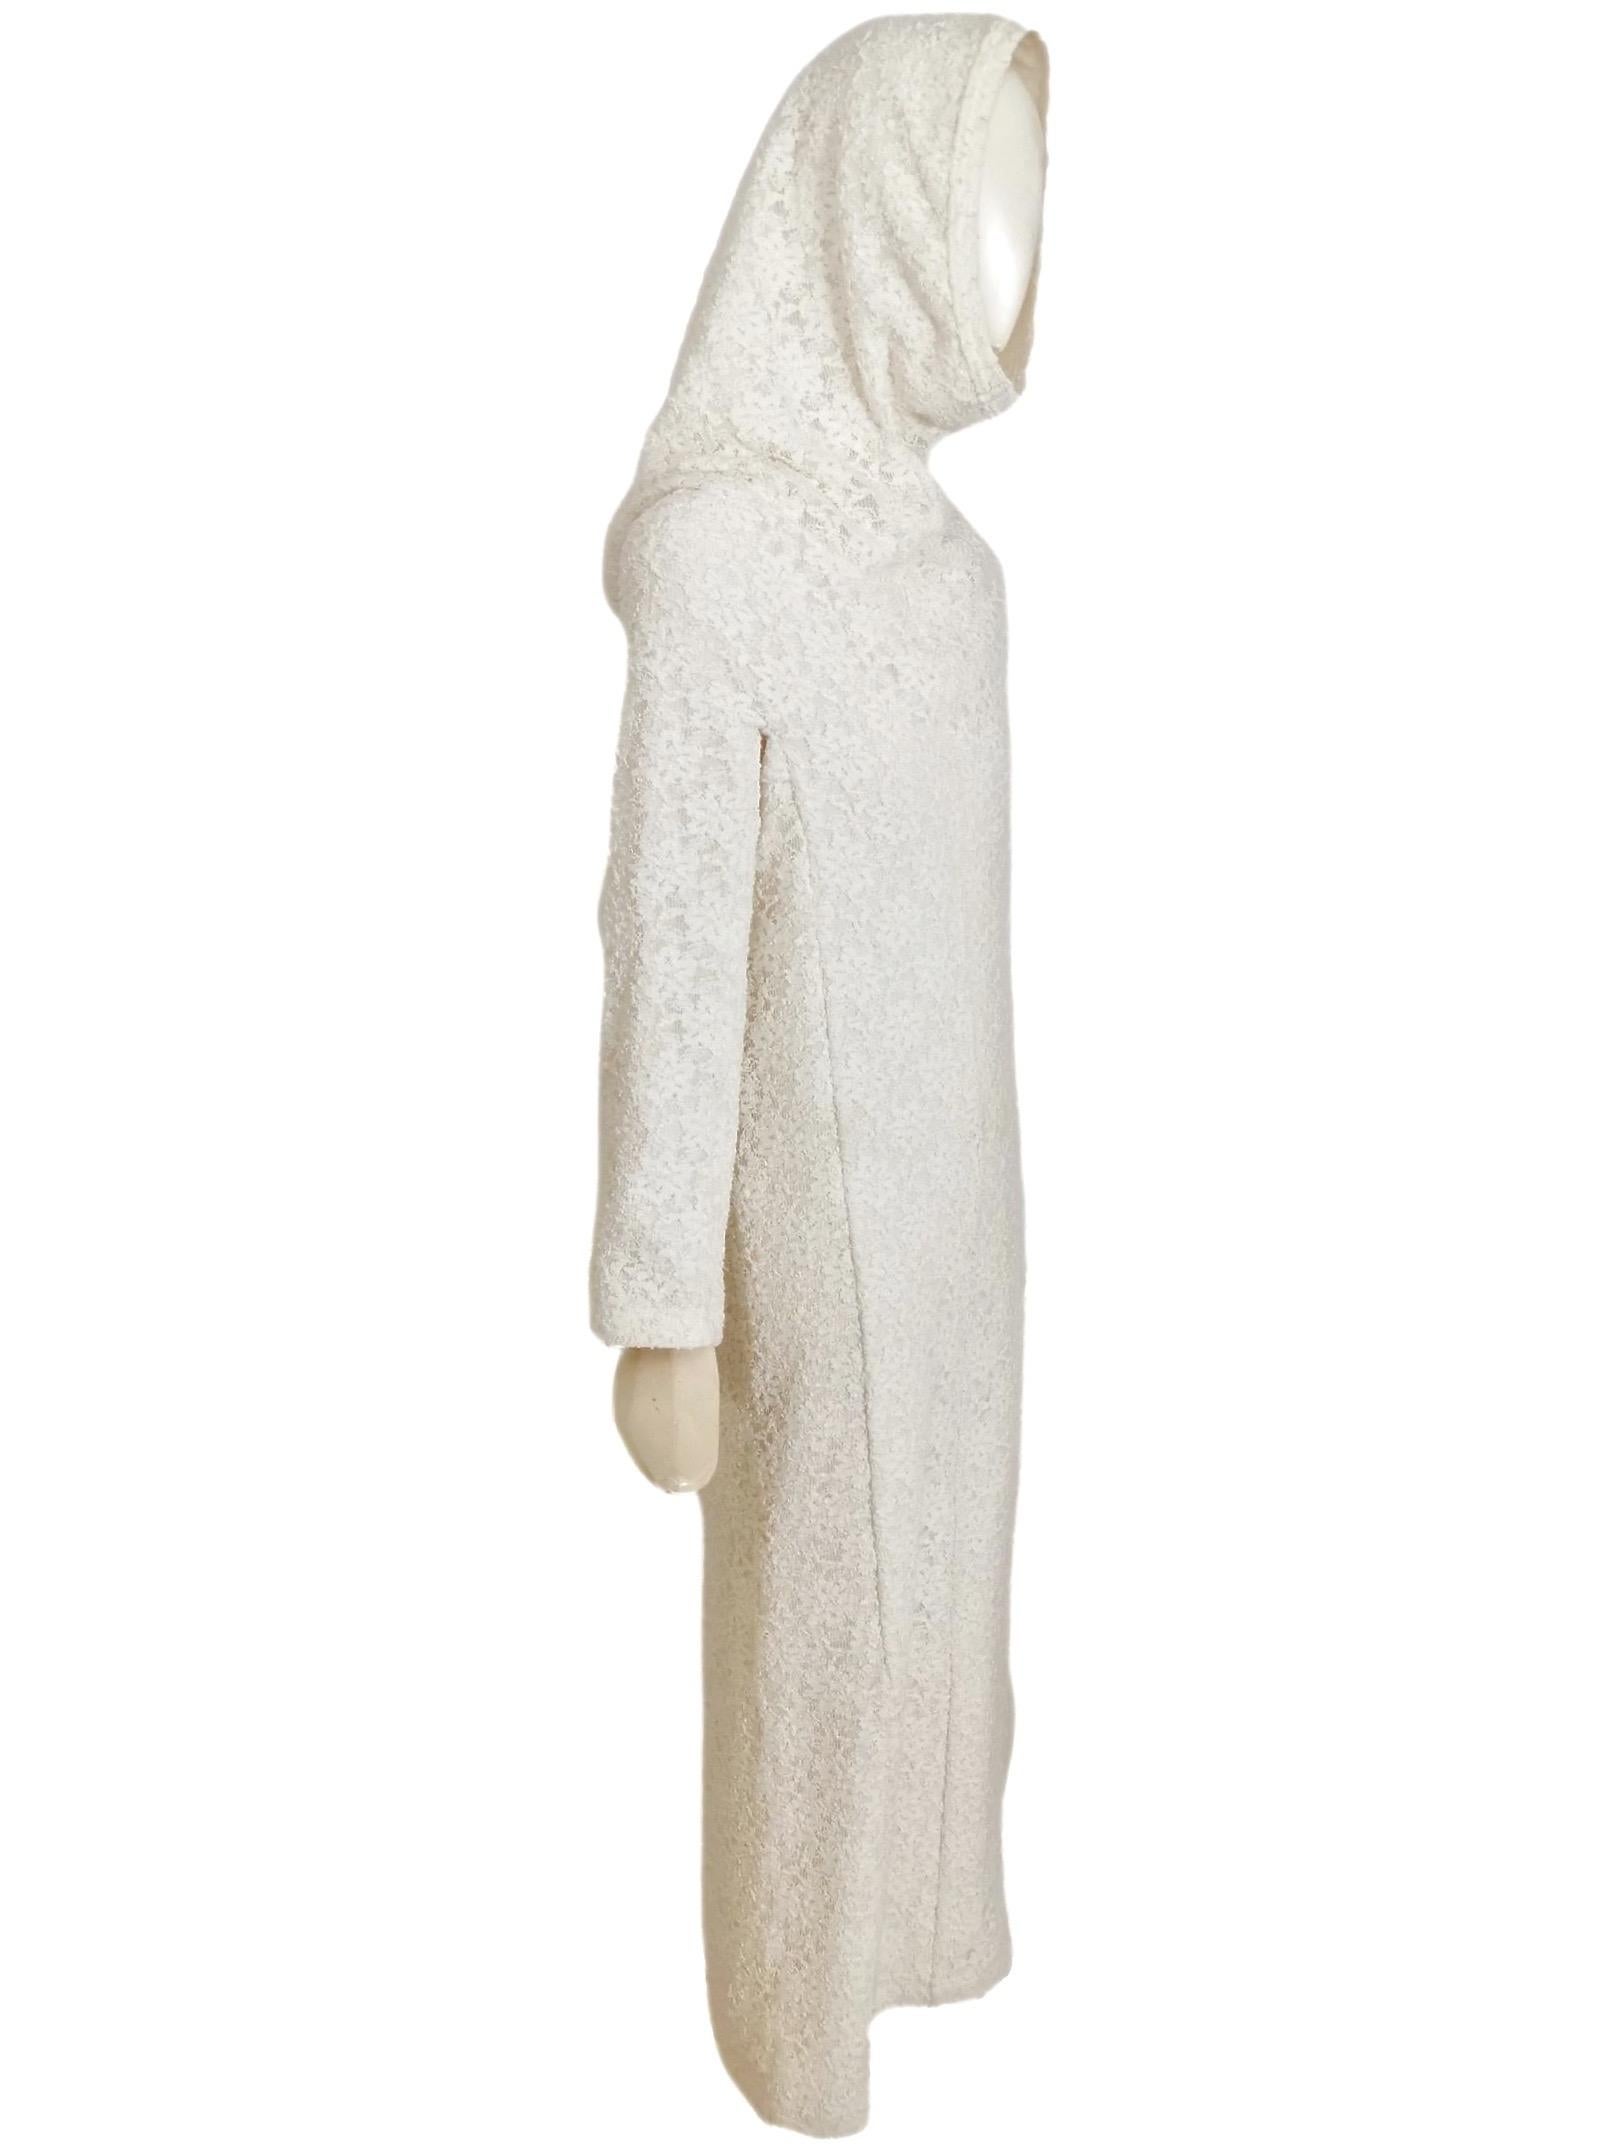 Comme Des Garcons White Drama Cowl Hooded Dress AD 2011 For Sale 5